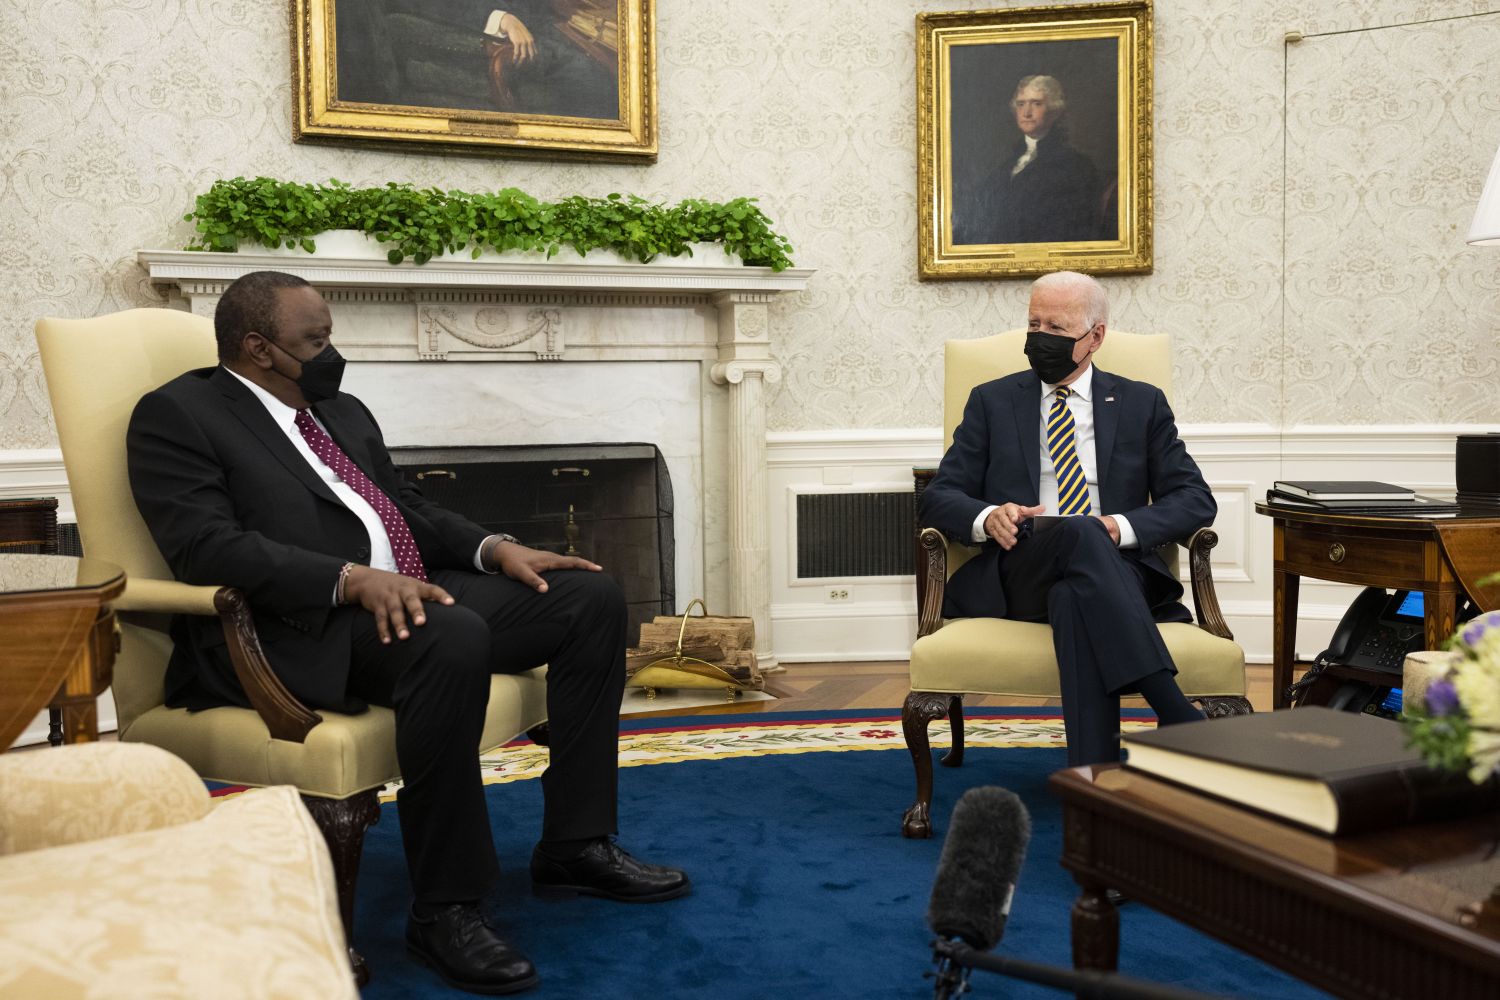 United States President Joe Biden, meets with President Uhuru Kenyatta of Kenya, in the Oval Office of the White House in Washington. Featuring: President Joe Biden, President Uhuru Kenyatta Where: Washington, District Of Columbia, United States When: 14 Oct 2021 Credit: POOL via CNP/INSTARimages/Cover Images